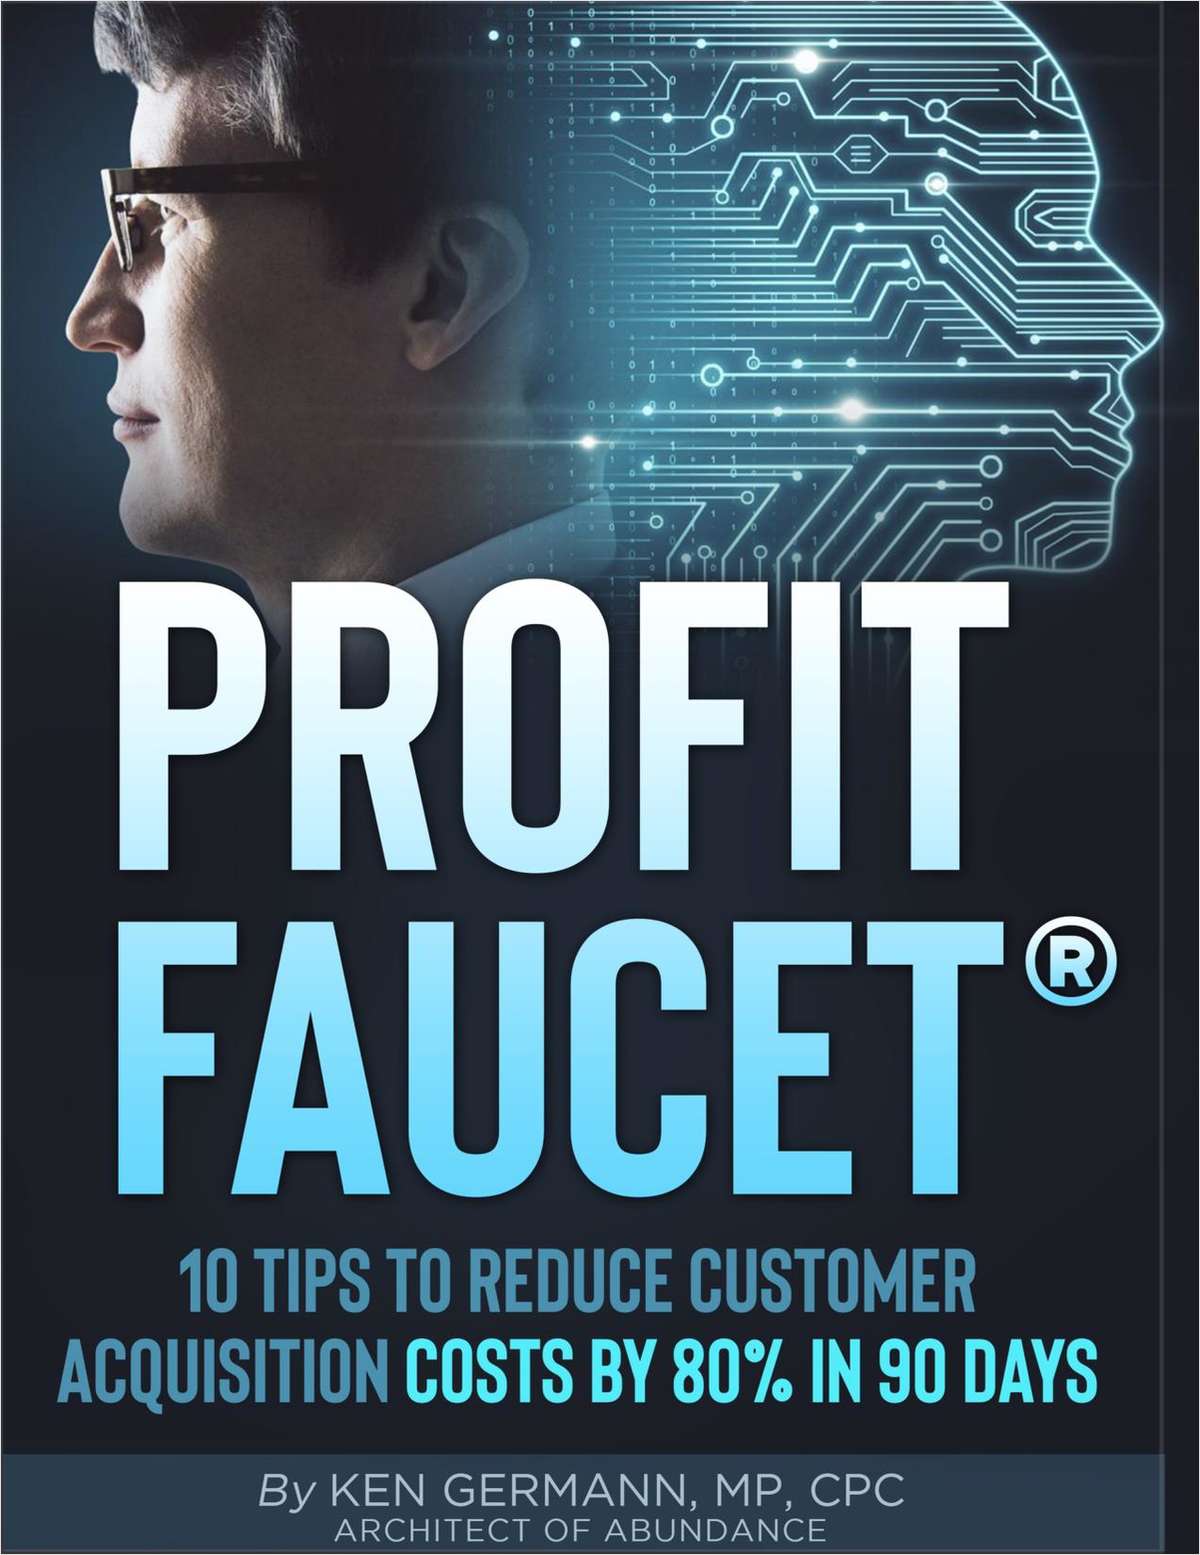 Profit Faucet: 10 Tips to Reduce Your Customer Acquisition Costs by 80% in 90 Days